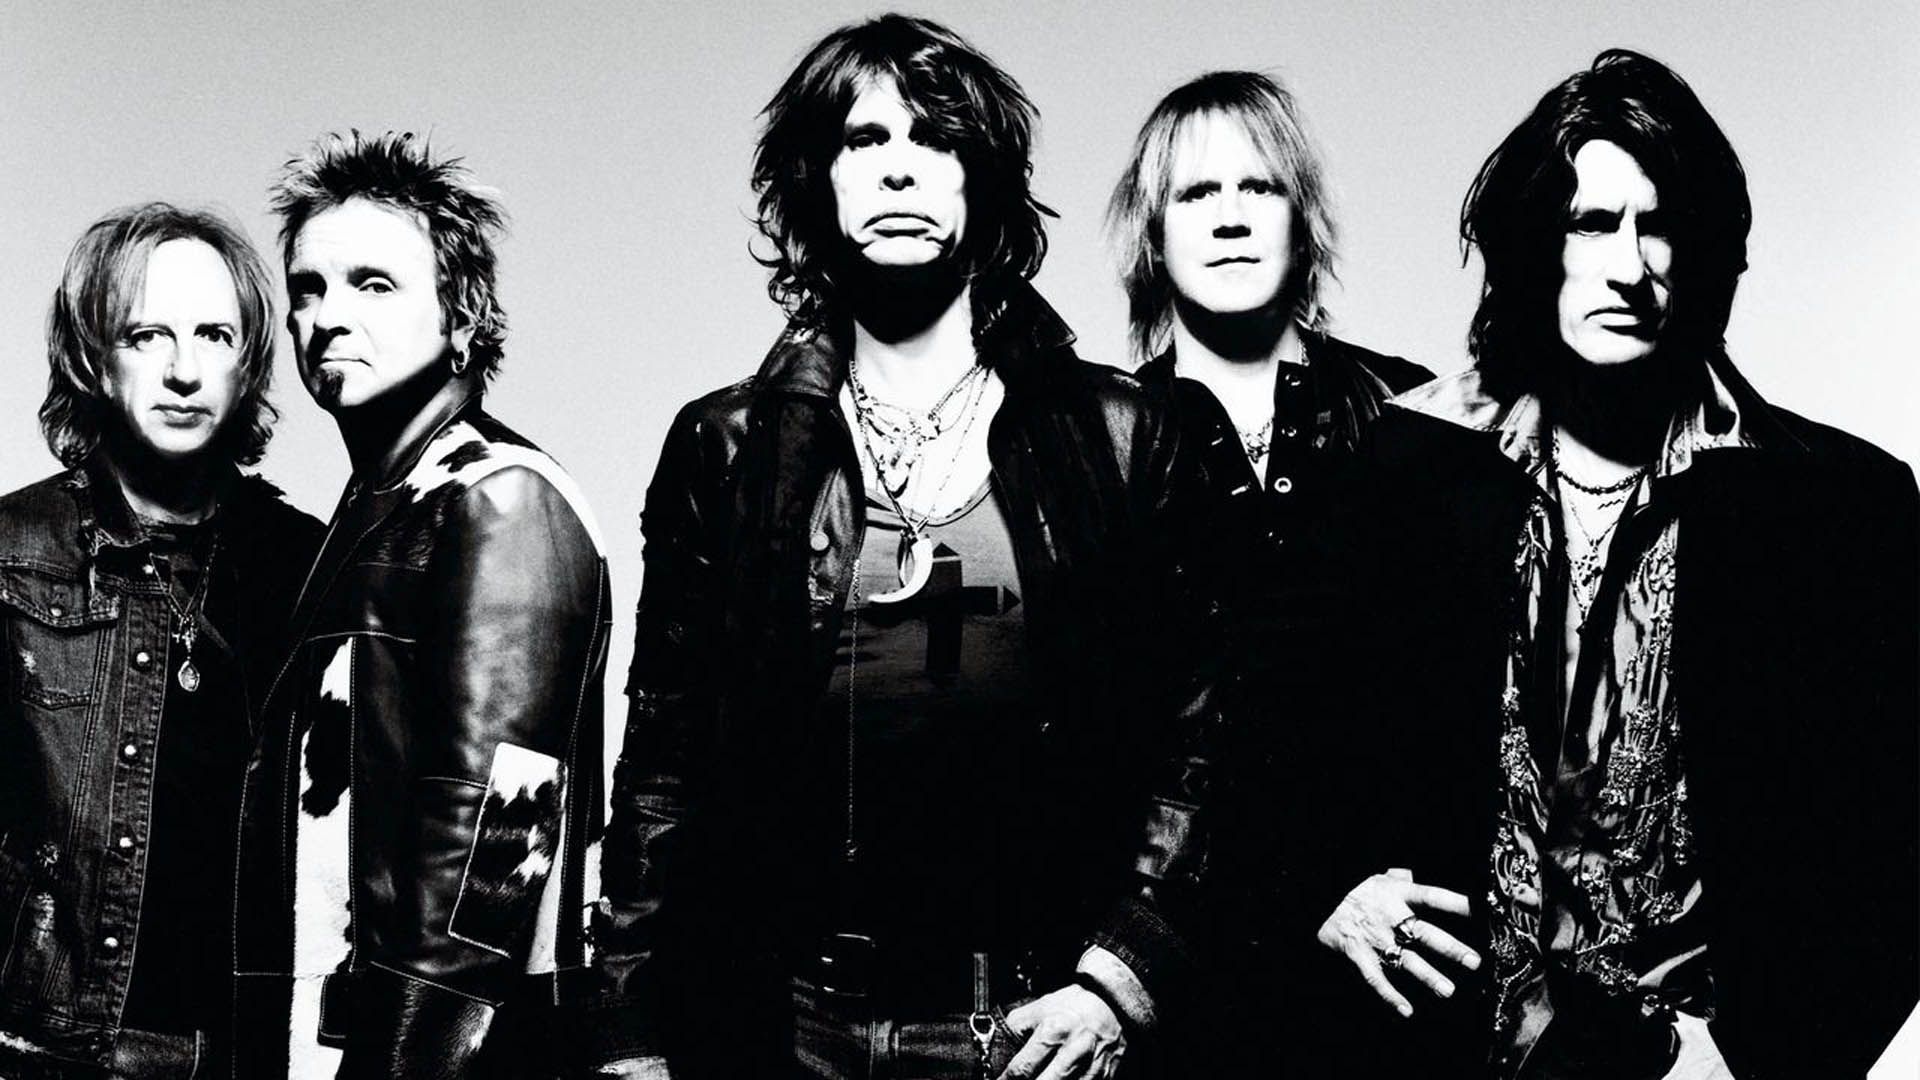 10 Bands That Need A Netflix Biopic Like The Dirt